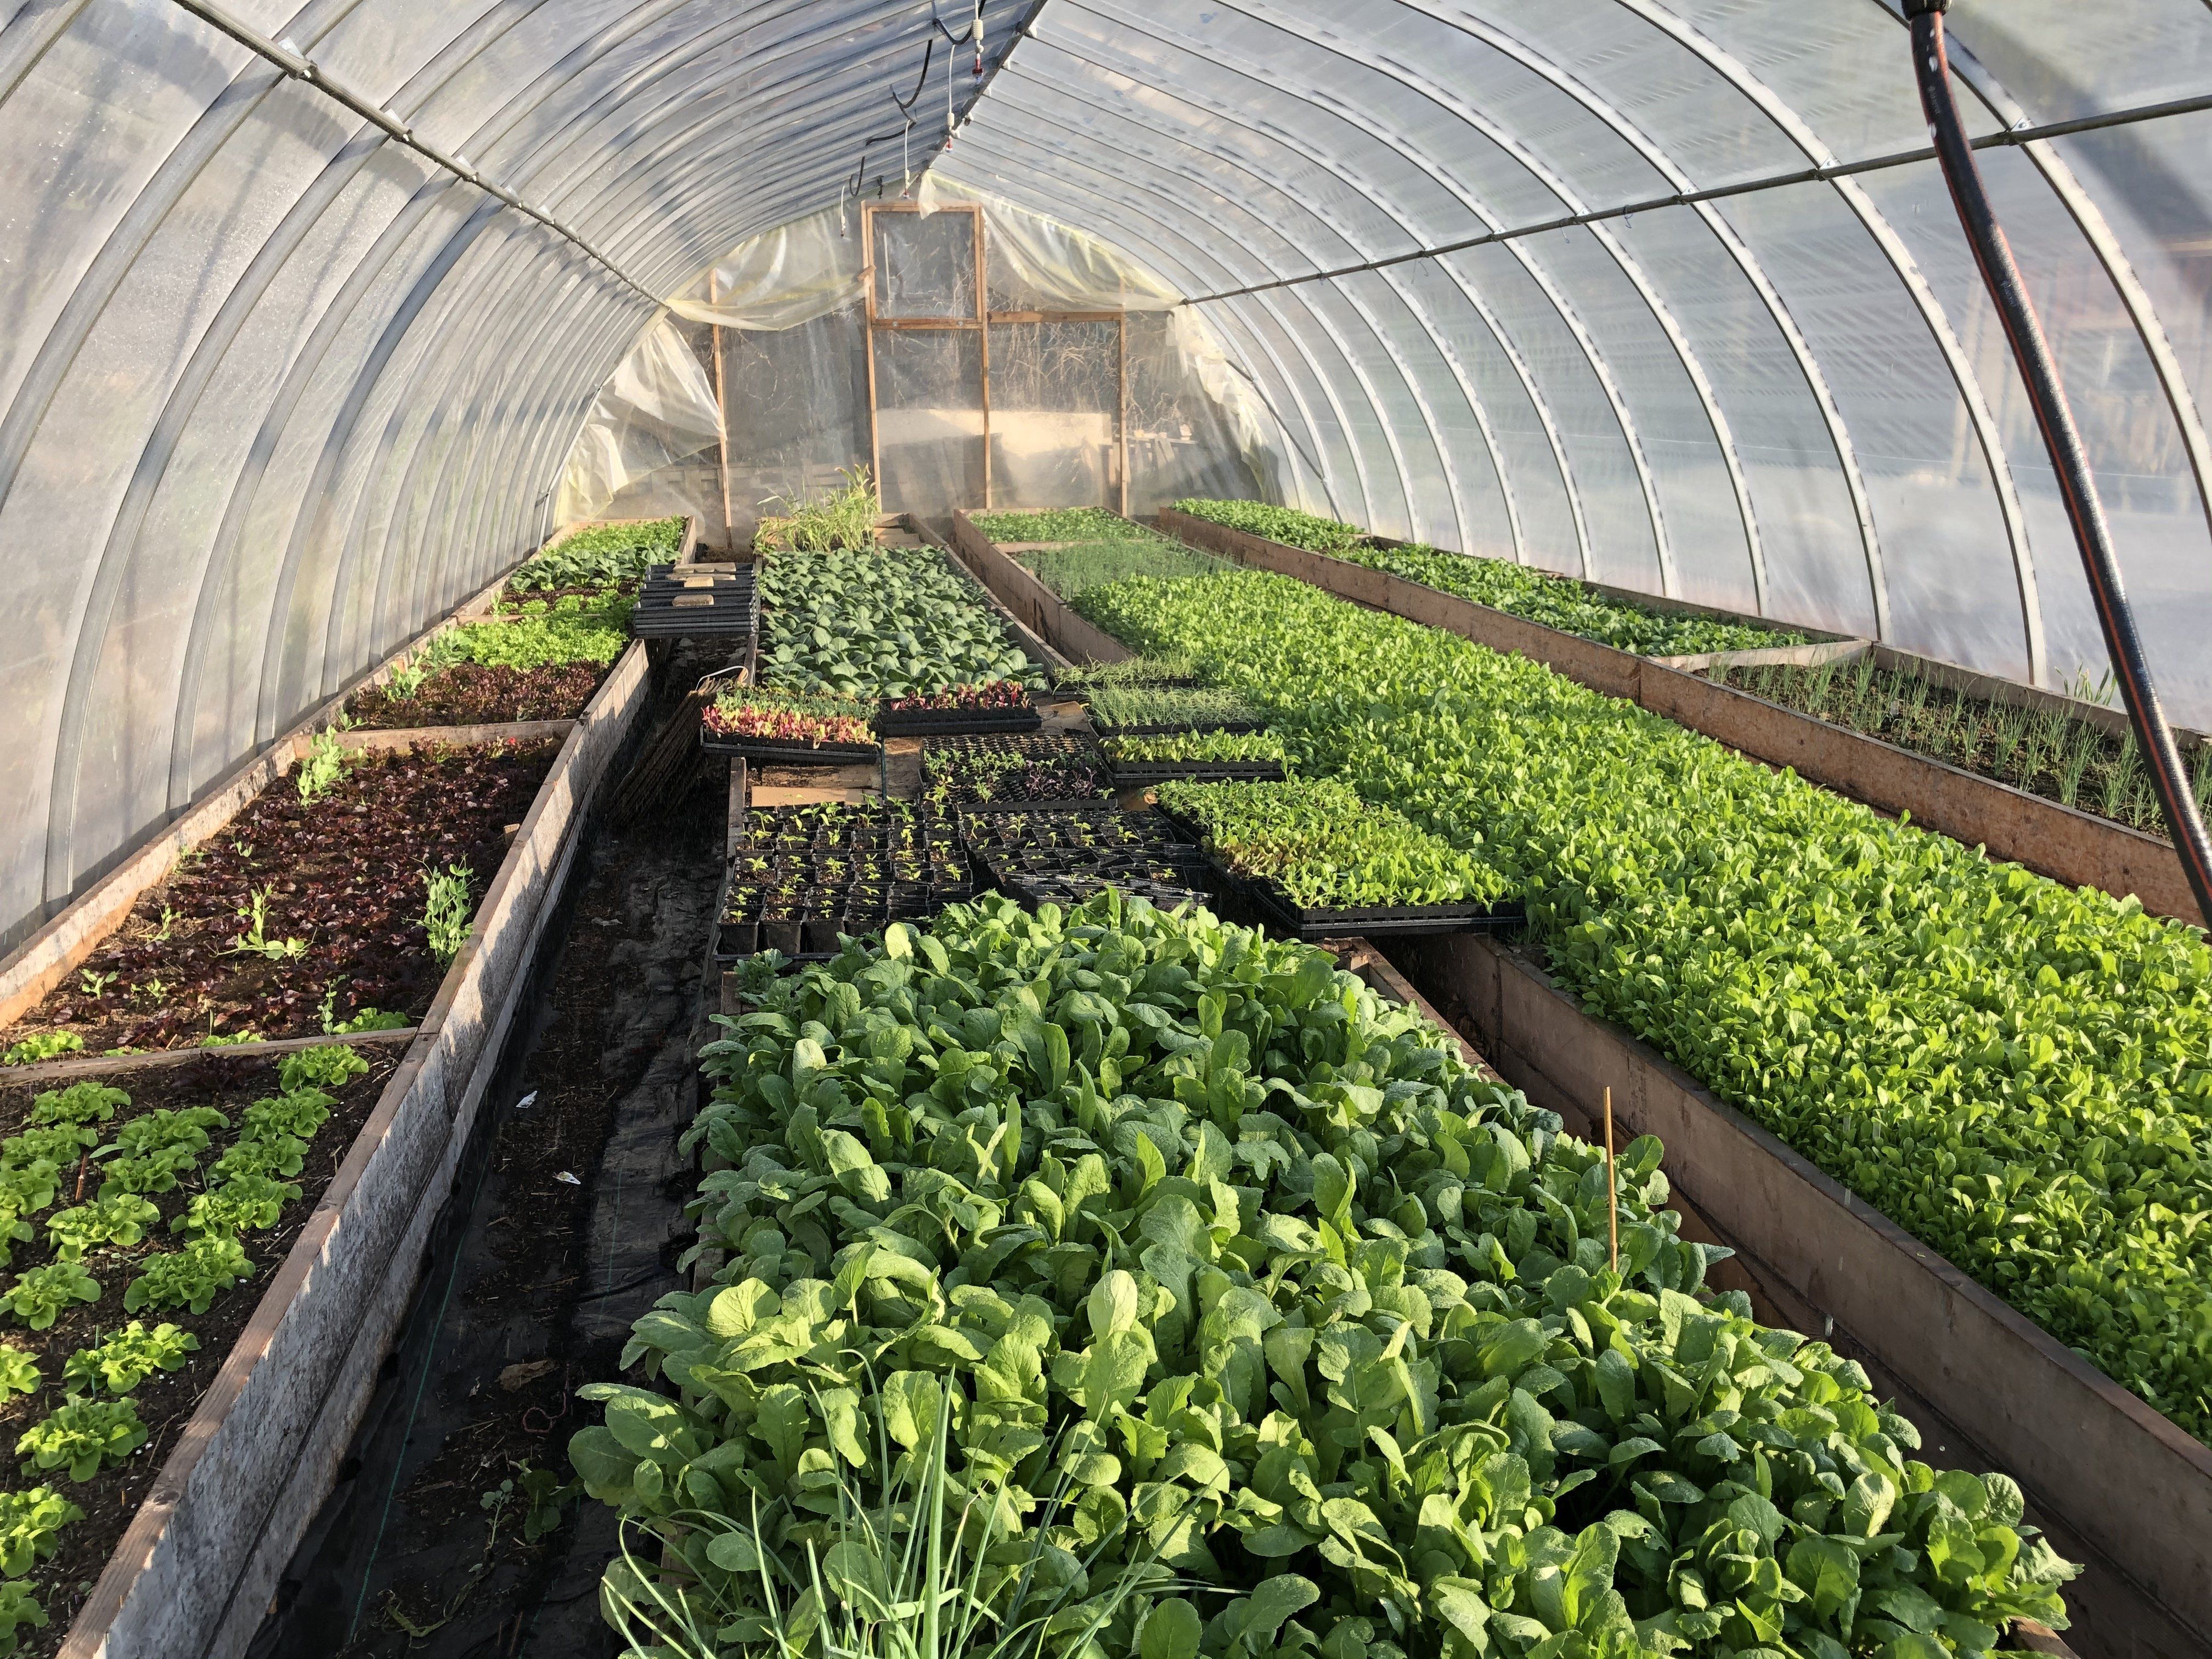 Farm Happenings for May 13, 2020